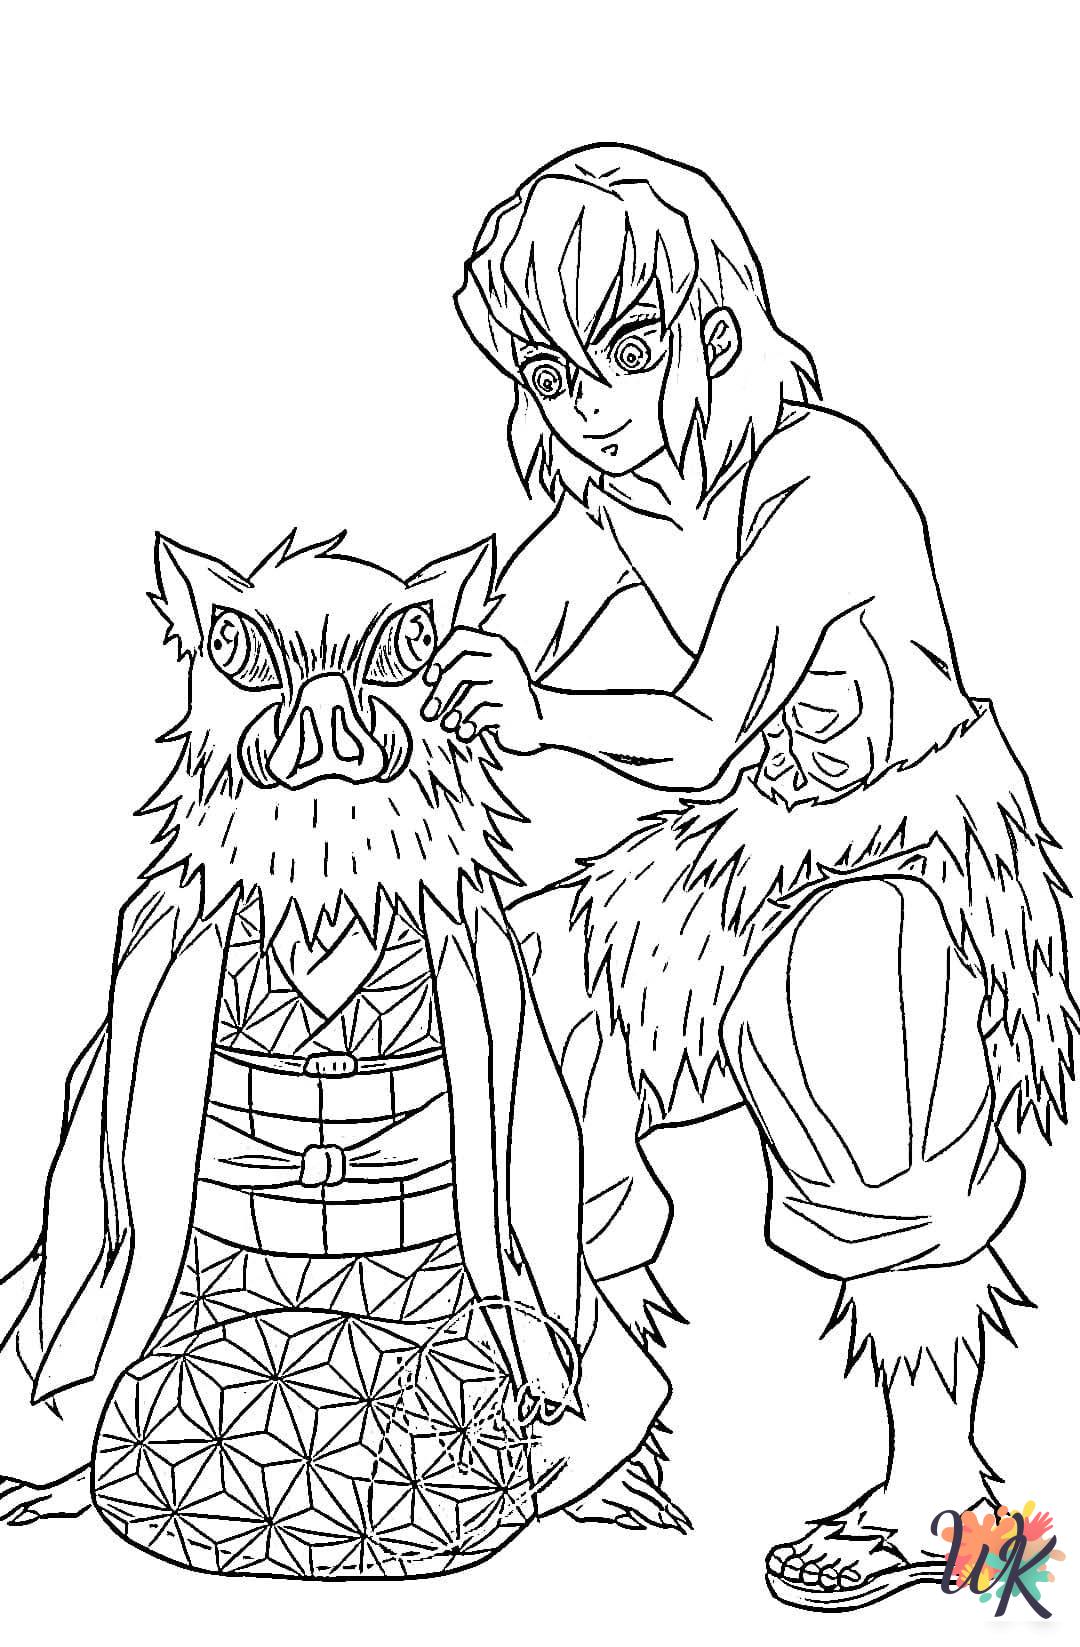 Inosuke coloring book pages